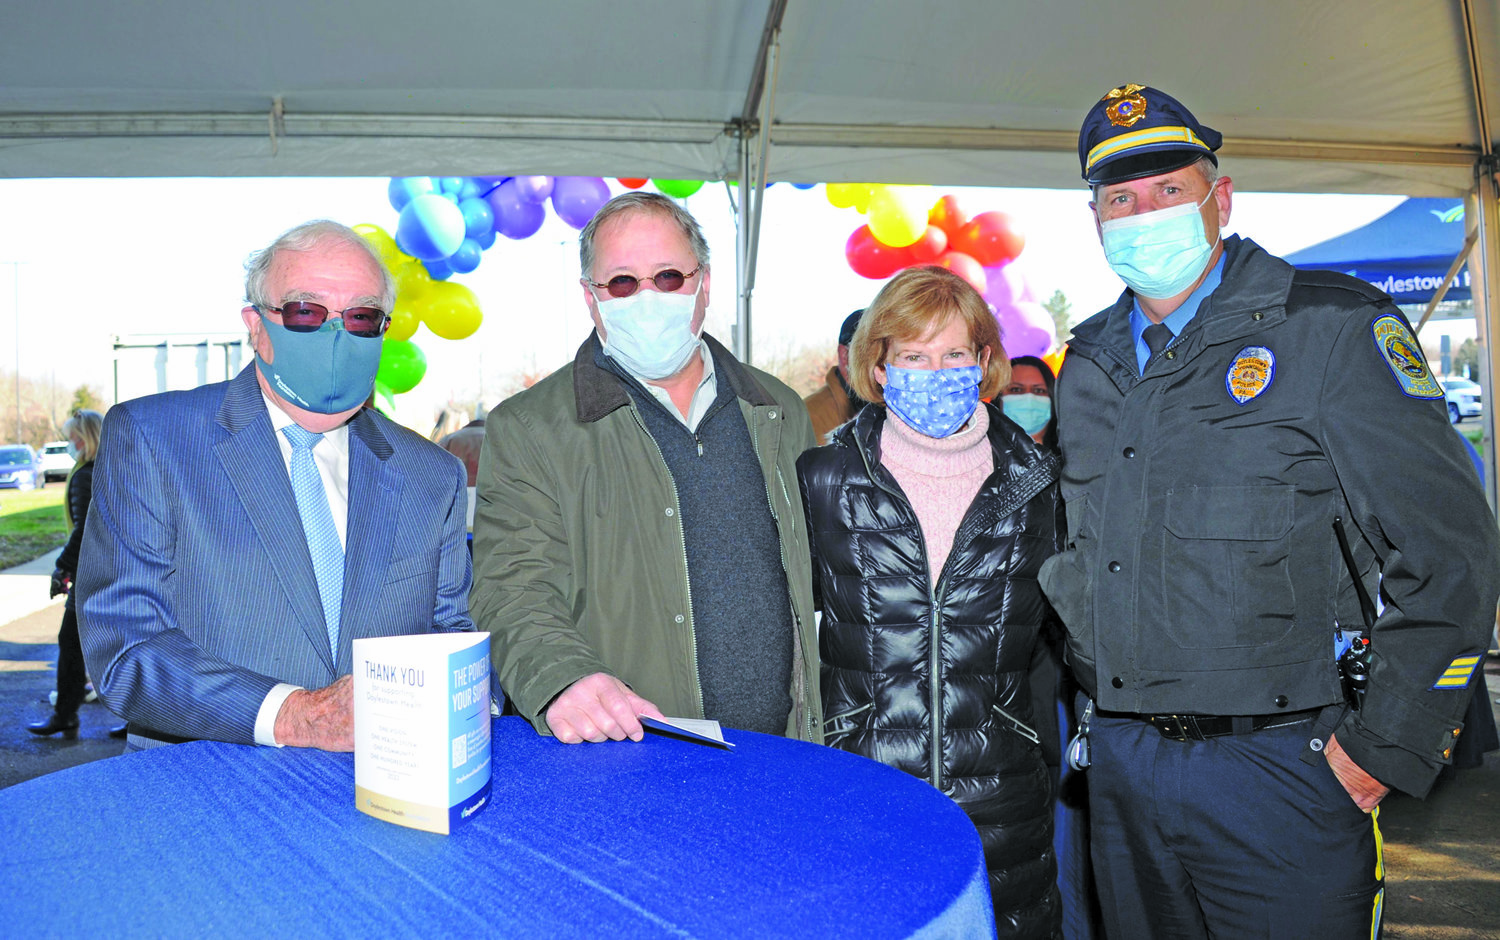 Dr. Donald Parlee, Ken Snyder, Cecile Balizet and Doylestown Township Police Chief Dean Logan.